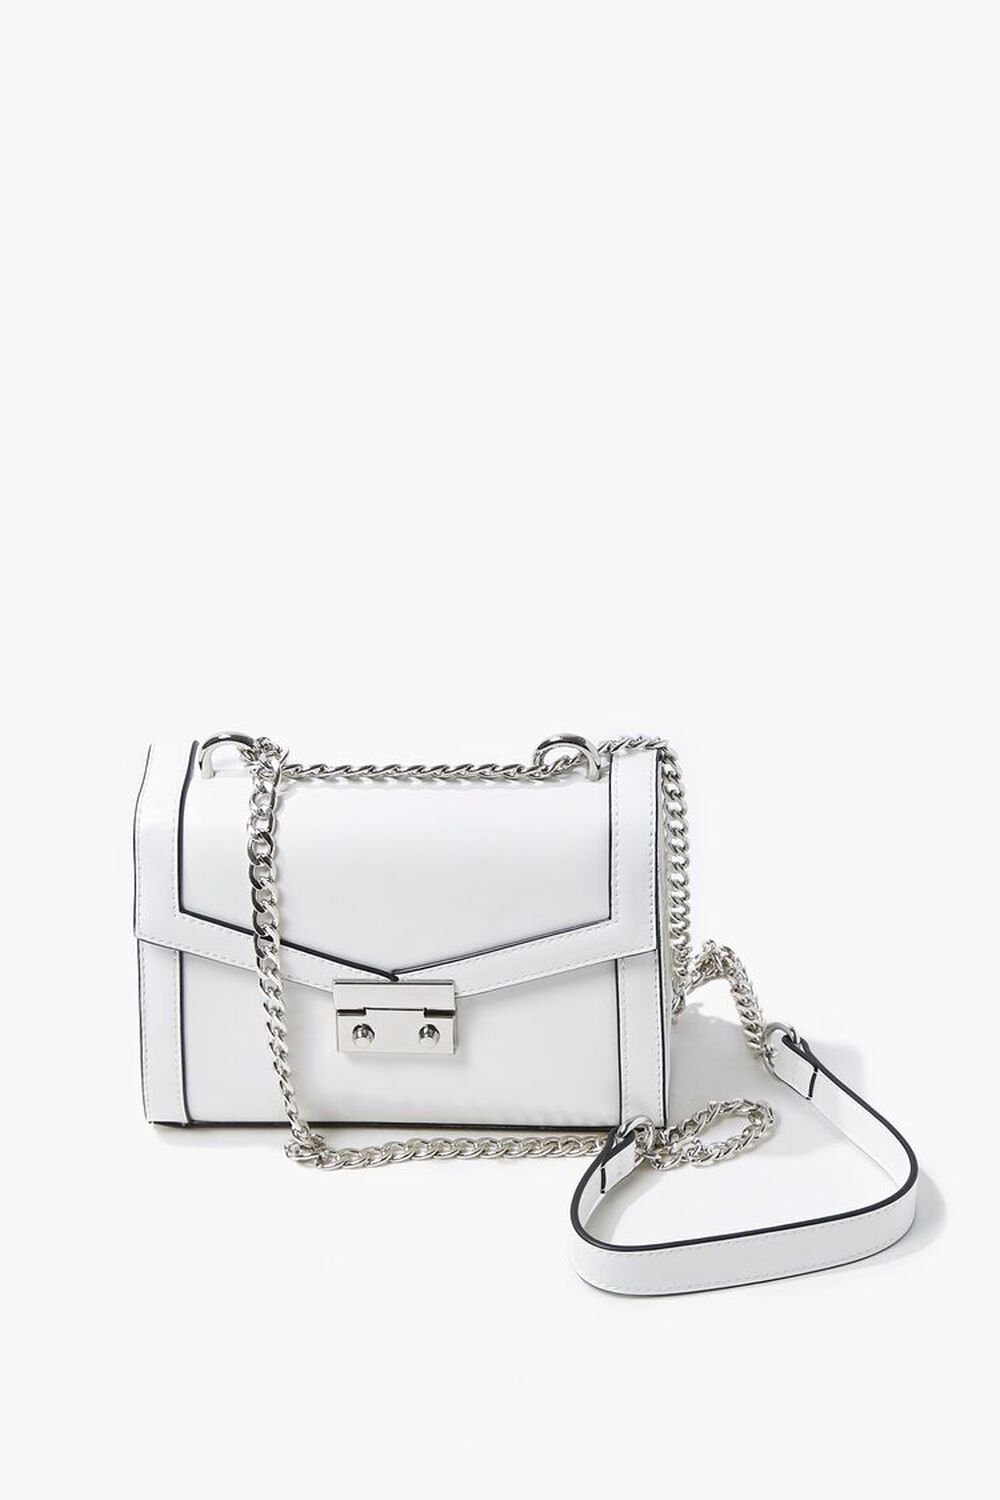 WHITE Structured Piped-Trim Crossbody Bag, image 1